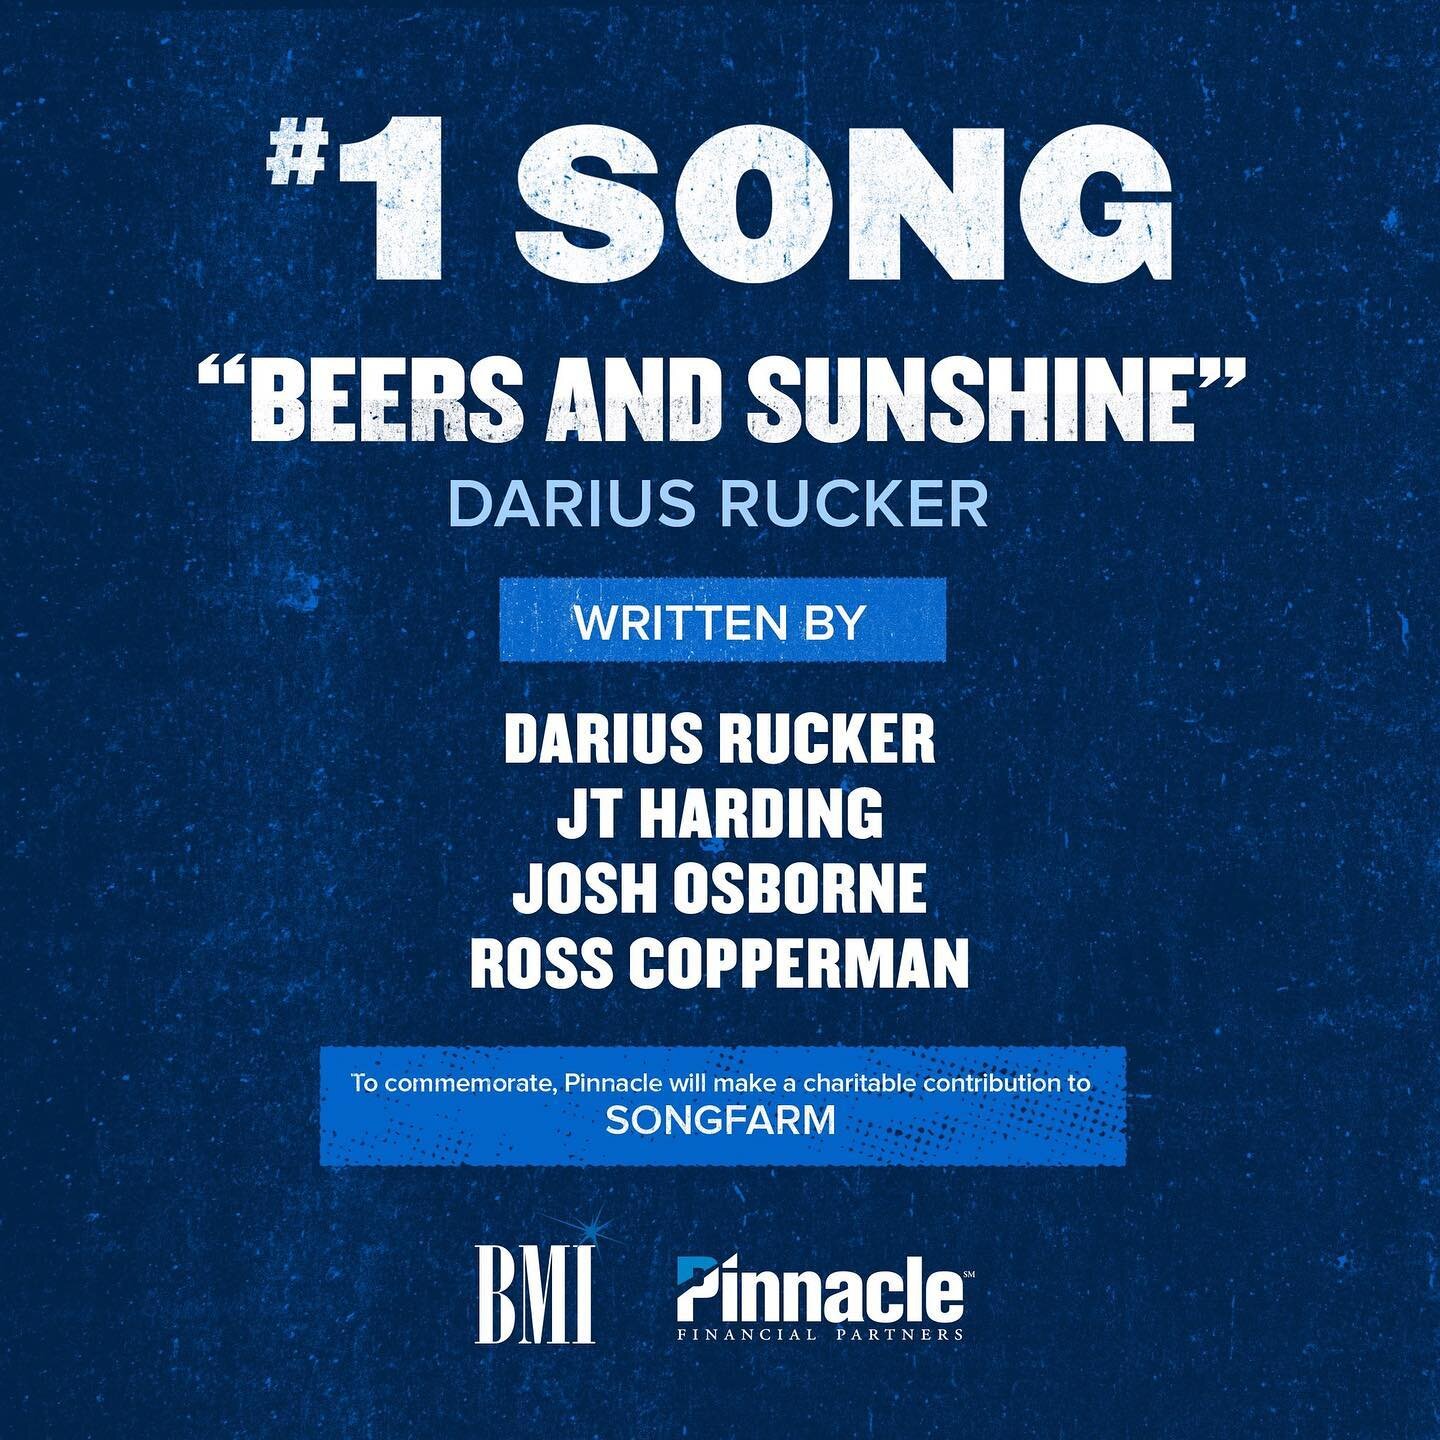 Congratulations to our very own @rosscopperman for another #1 with @dariusrucker! And a huge thanks to our friends at @bmi and Pinnacle for supporting music education. #musiceducation #songfarm